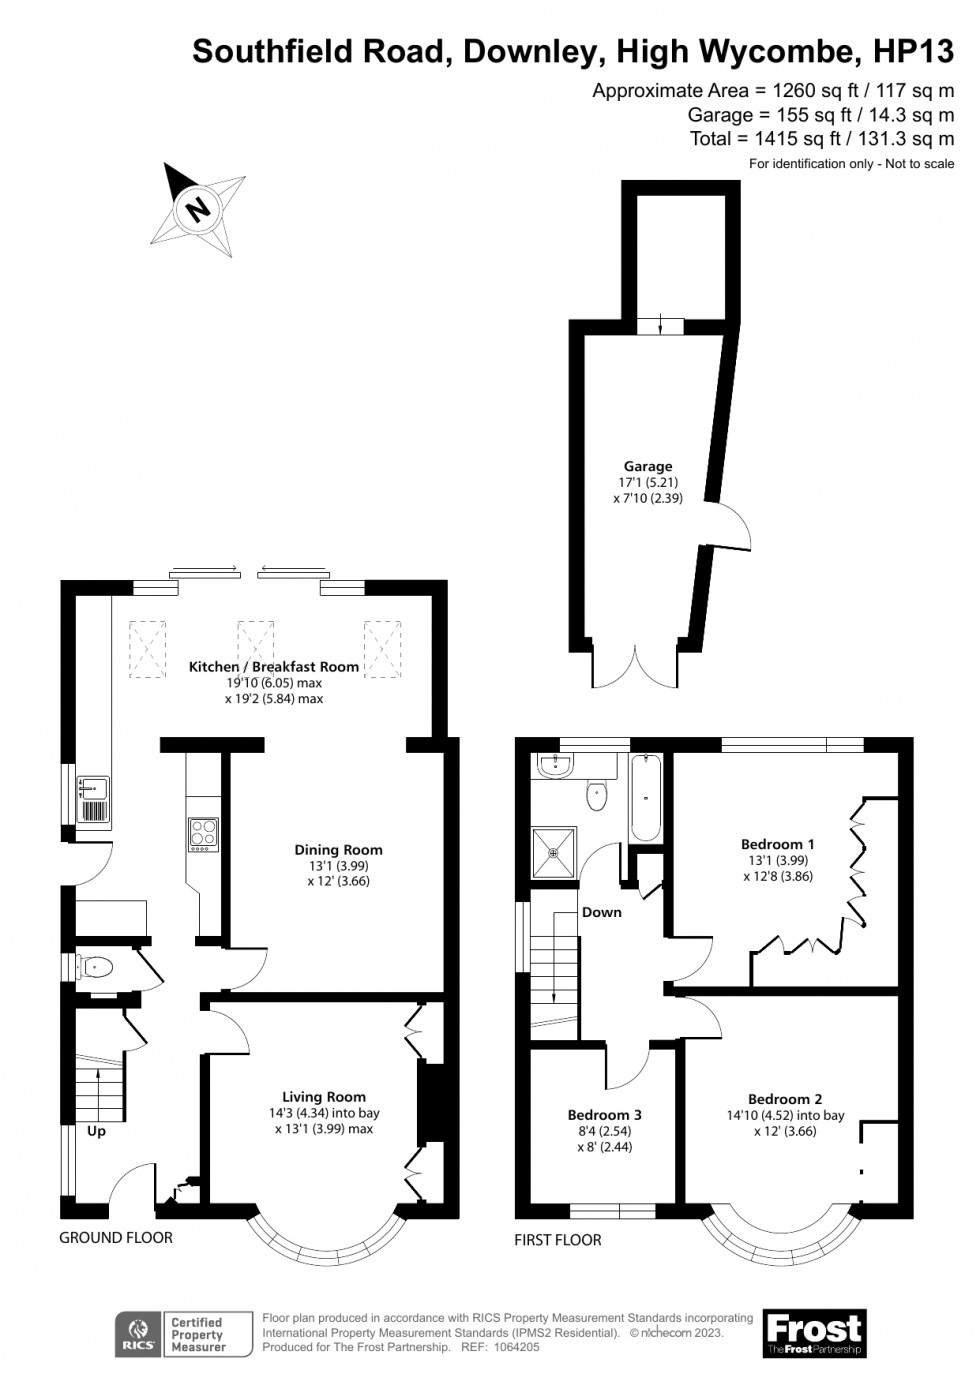 Floorplan for Downley, High Wycombe, HP13